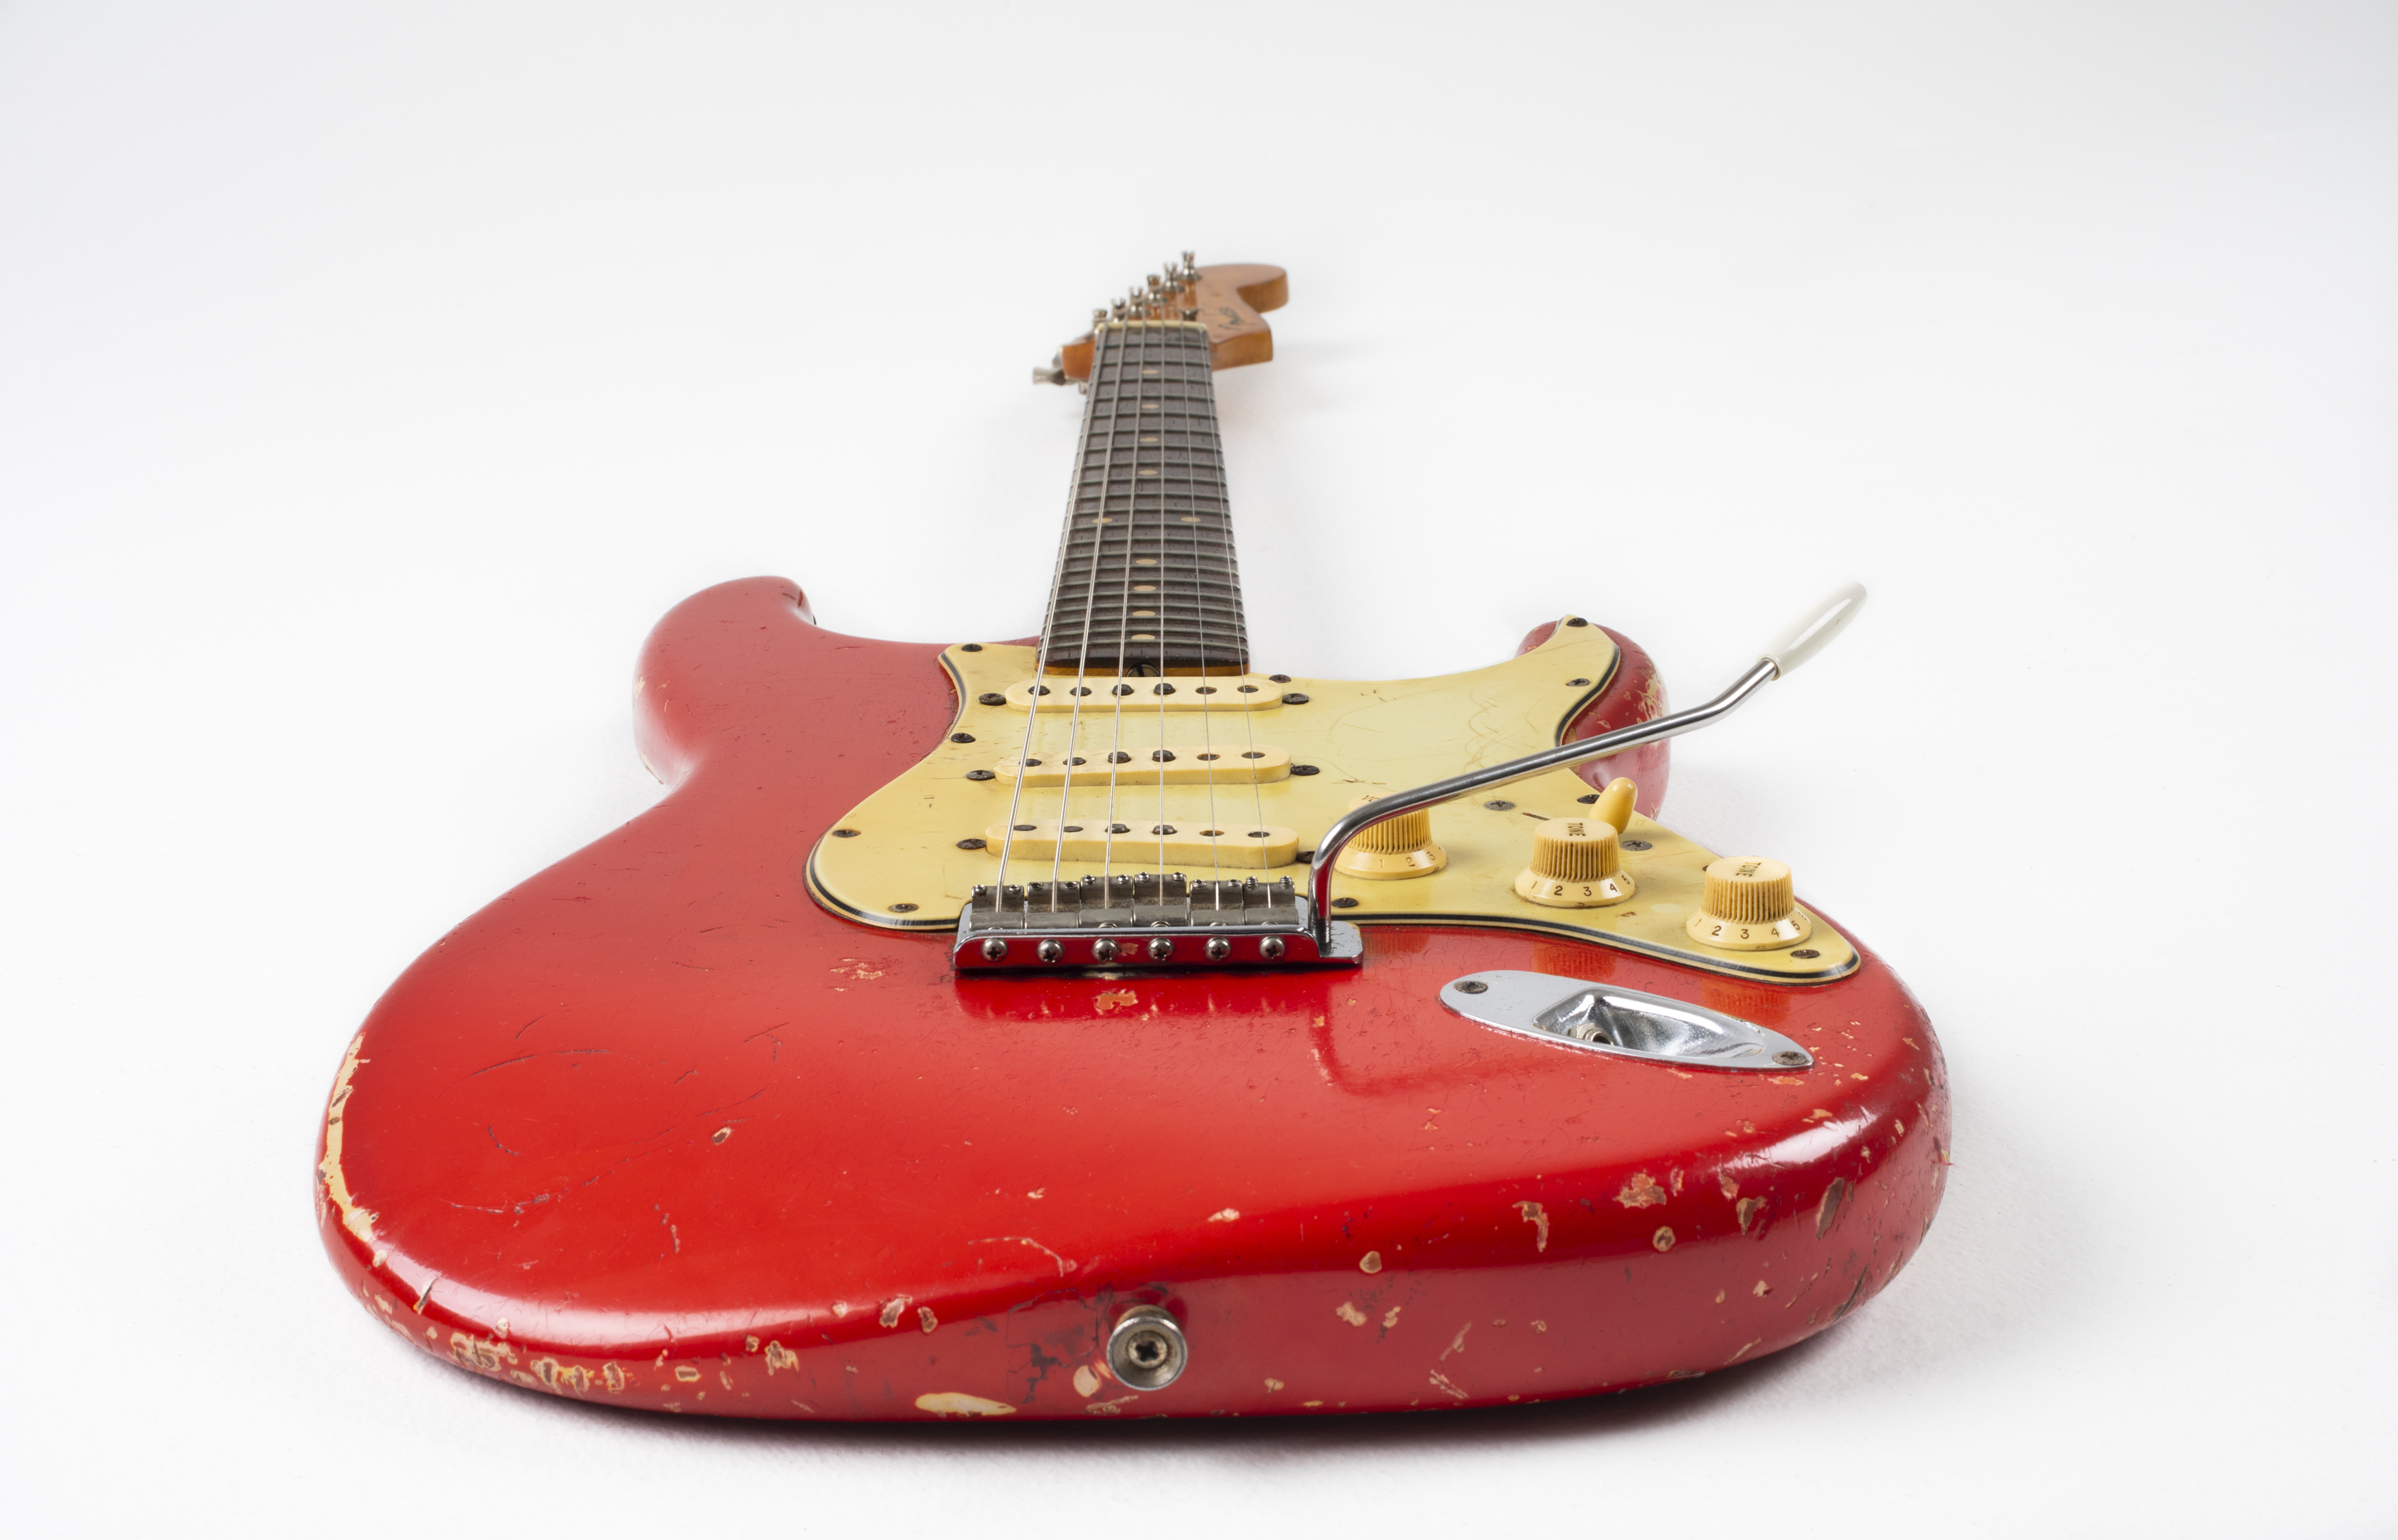 Electric guitar with ‘Dakota red’ body, cream pick-guard and dark rosewood fret-board. The guitar is viewed from the body along the neck towards the headstock. The body has severe road-wear.